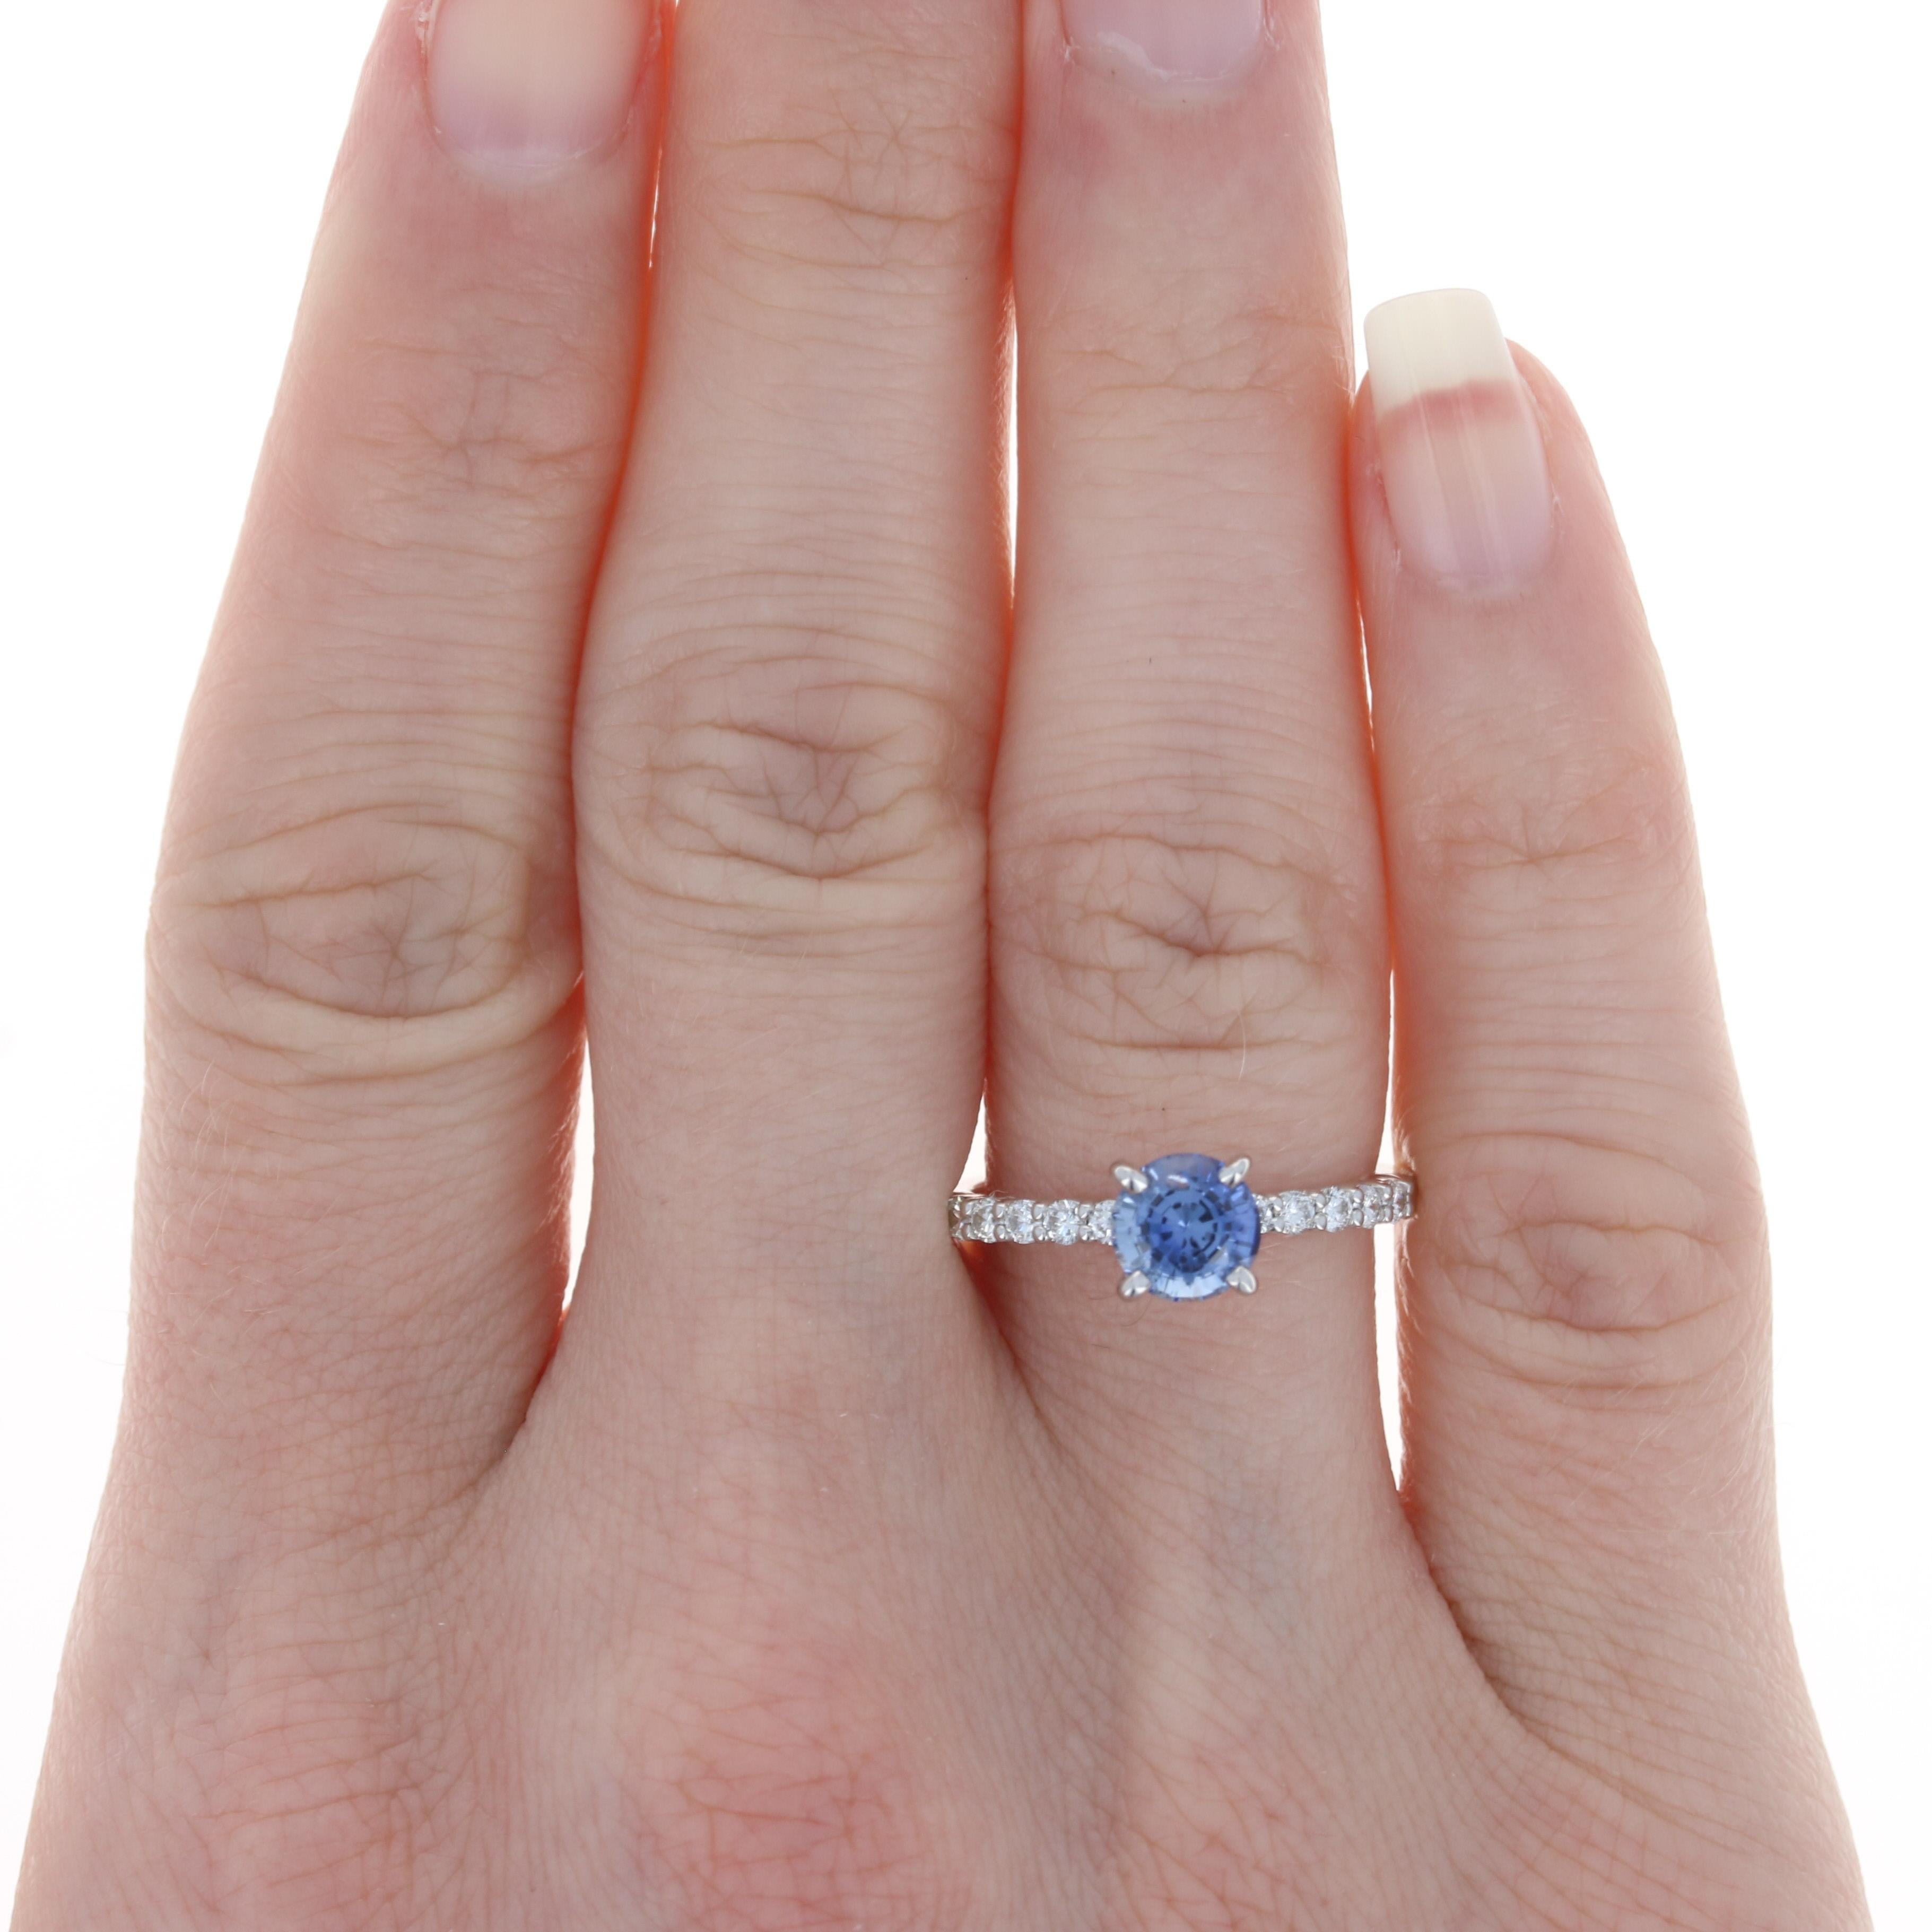 Engagement Ring Size: 6 1/2
Wedding Band Size: 6 1/4
Sizing Fee: Down 1 size for $50 per ring or Up 2 sizes for $60 per ring

Metal Content: 18k White Gold

Stone Information: 
Natural Sapphire
Treatment: Heating
Carat: 1.21ct
Cut: Round
Color: